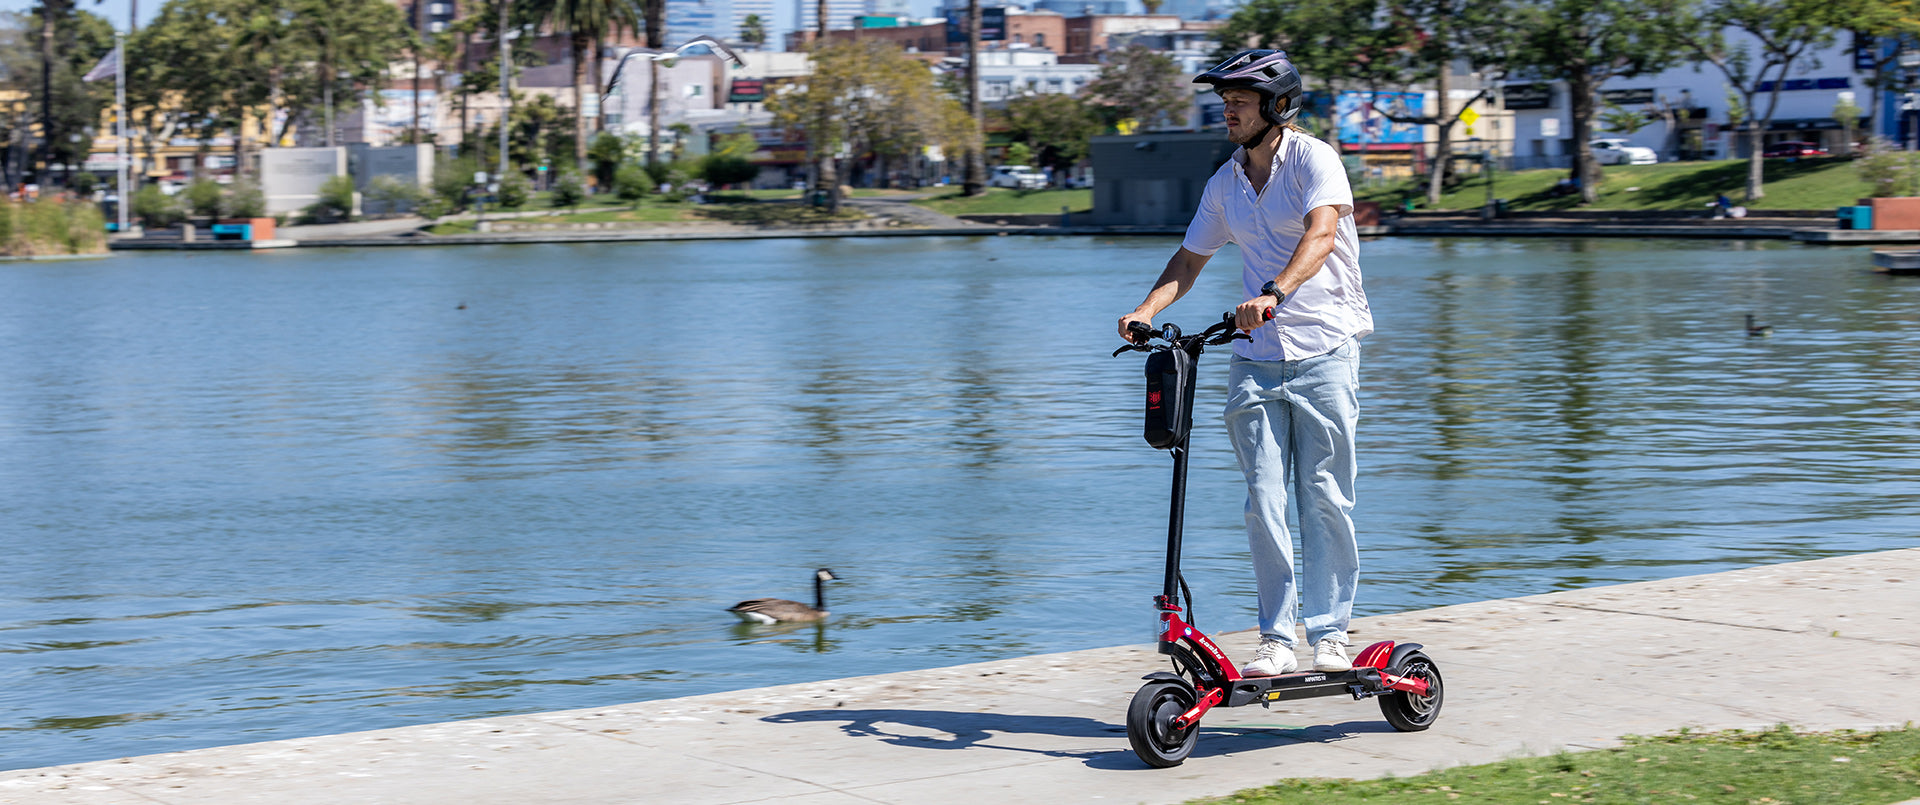 An adult male in casual attire and a helmet rides a red Kaabo Mantis 10 Lite electric scooter along a lakeside path. In the background, there are city buildings, trees, and a lake with ducks.